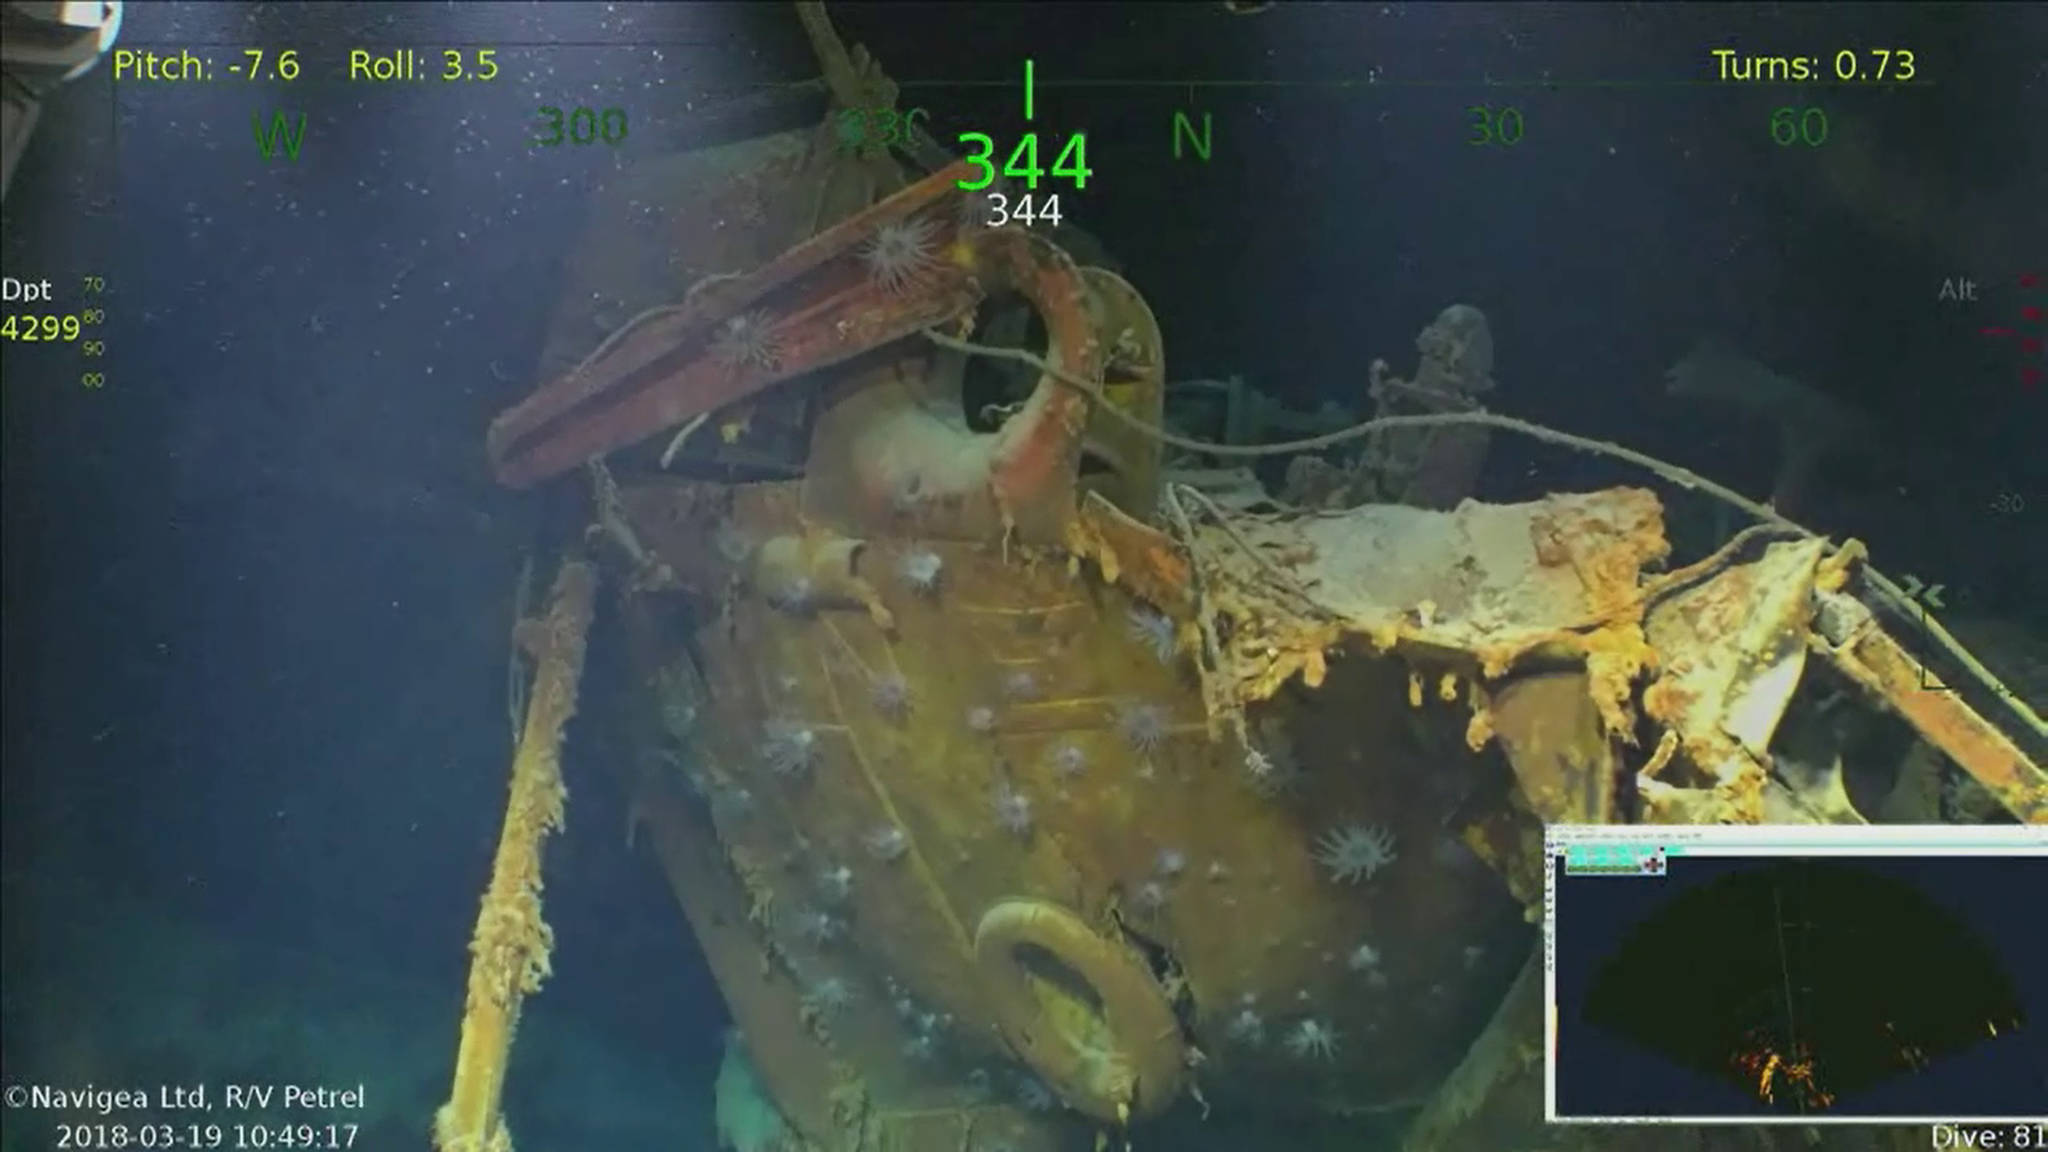 In this Monday underwater video image courtesy of Paul Allen shows wreckage from the USS Juneau, a U.S. Navy ship sunk by the Japanese torpedoes 76 years ago, found in the South Pacific. Philanthropist and Microsoft co-founder Allen has announced that wreckage of the sunken ship on which five brothers died in World War II has been discovered in the South Pacific. A spokeswoman for Allen confirms wreckage from the USS Juneau was found Saturday off the coast of the Solomon Islands. (Paul Allen via AP)